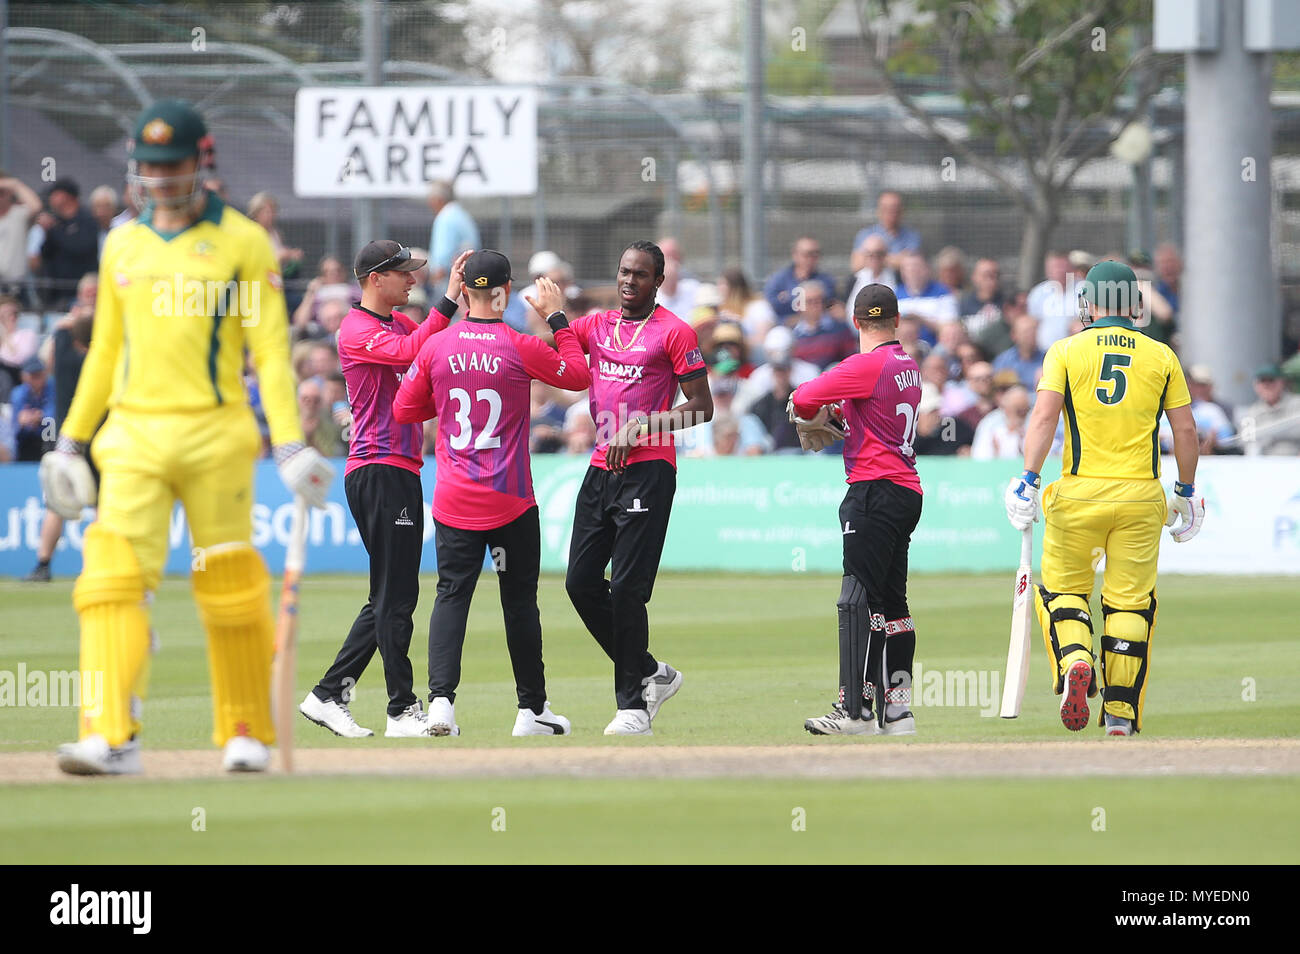 Hove, UK. 7th Jun, 2018. Jofra Archer ( C ) of Sussex celebrates taking the wicket of Aaron Finch of Australia ( R ) during the Tour match between Sussex v Australia at the 1st Central County Ground, Hove on 7th June, 2018 in Sussex, England. Editorial Use Only Credit: Paul Terry Photo/Alamy Live News Stock Photo